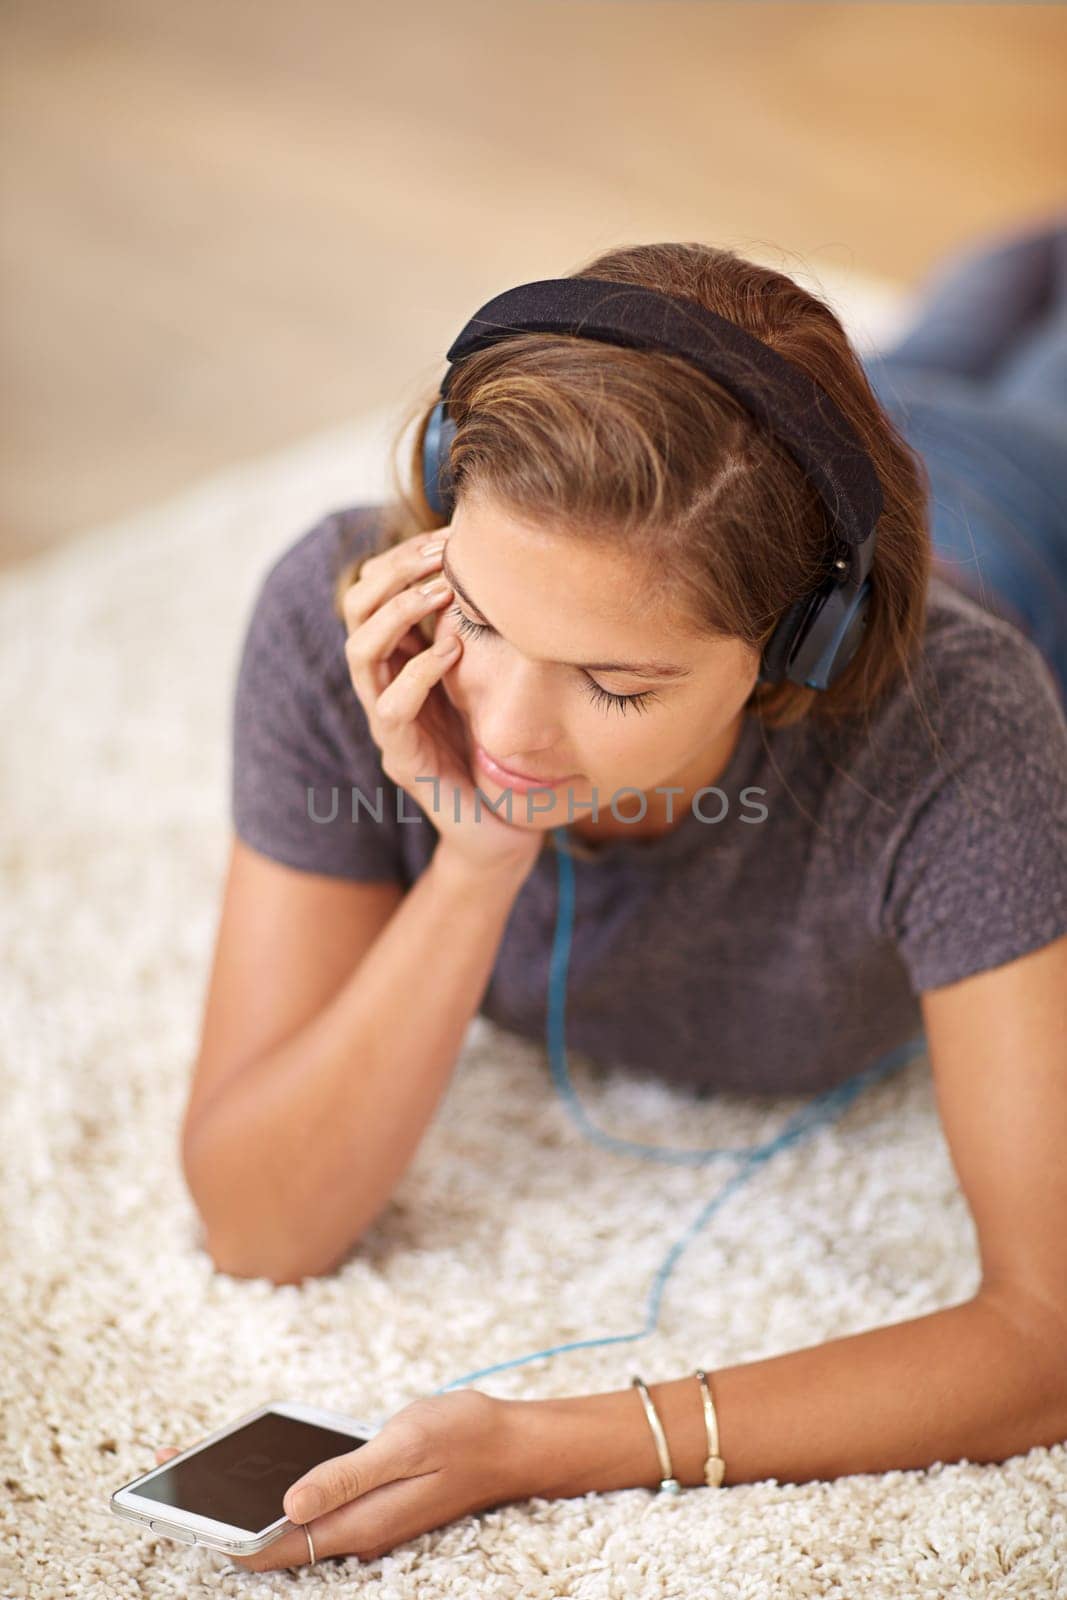 Carpet, headphones or woman with phone for music streaming, subscription or wellness in home. Smile, girl or female person listening to audio, track or song to relax on floor on mobile app for peace.